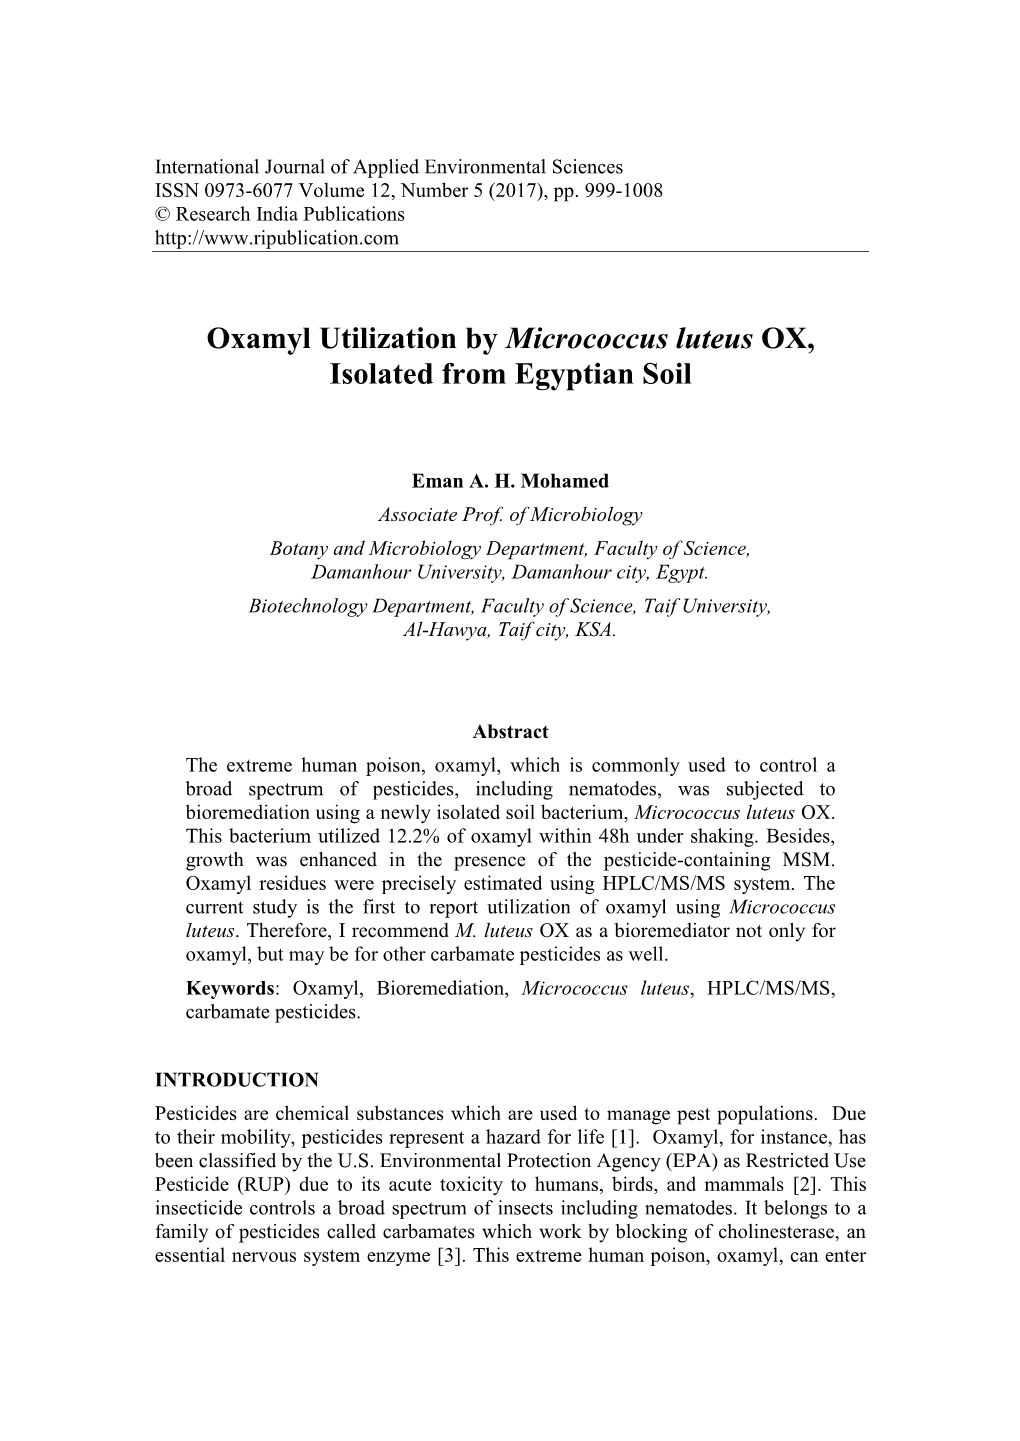 Oxamyl Utilization by Micrococcus Luteus OX, Isolated from Egyptian Soil